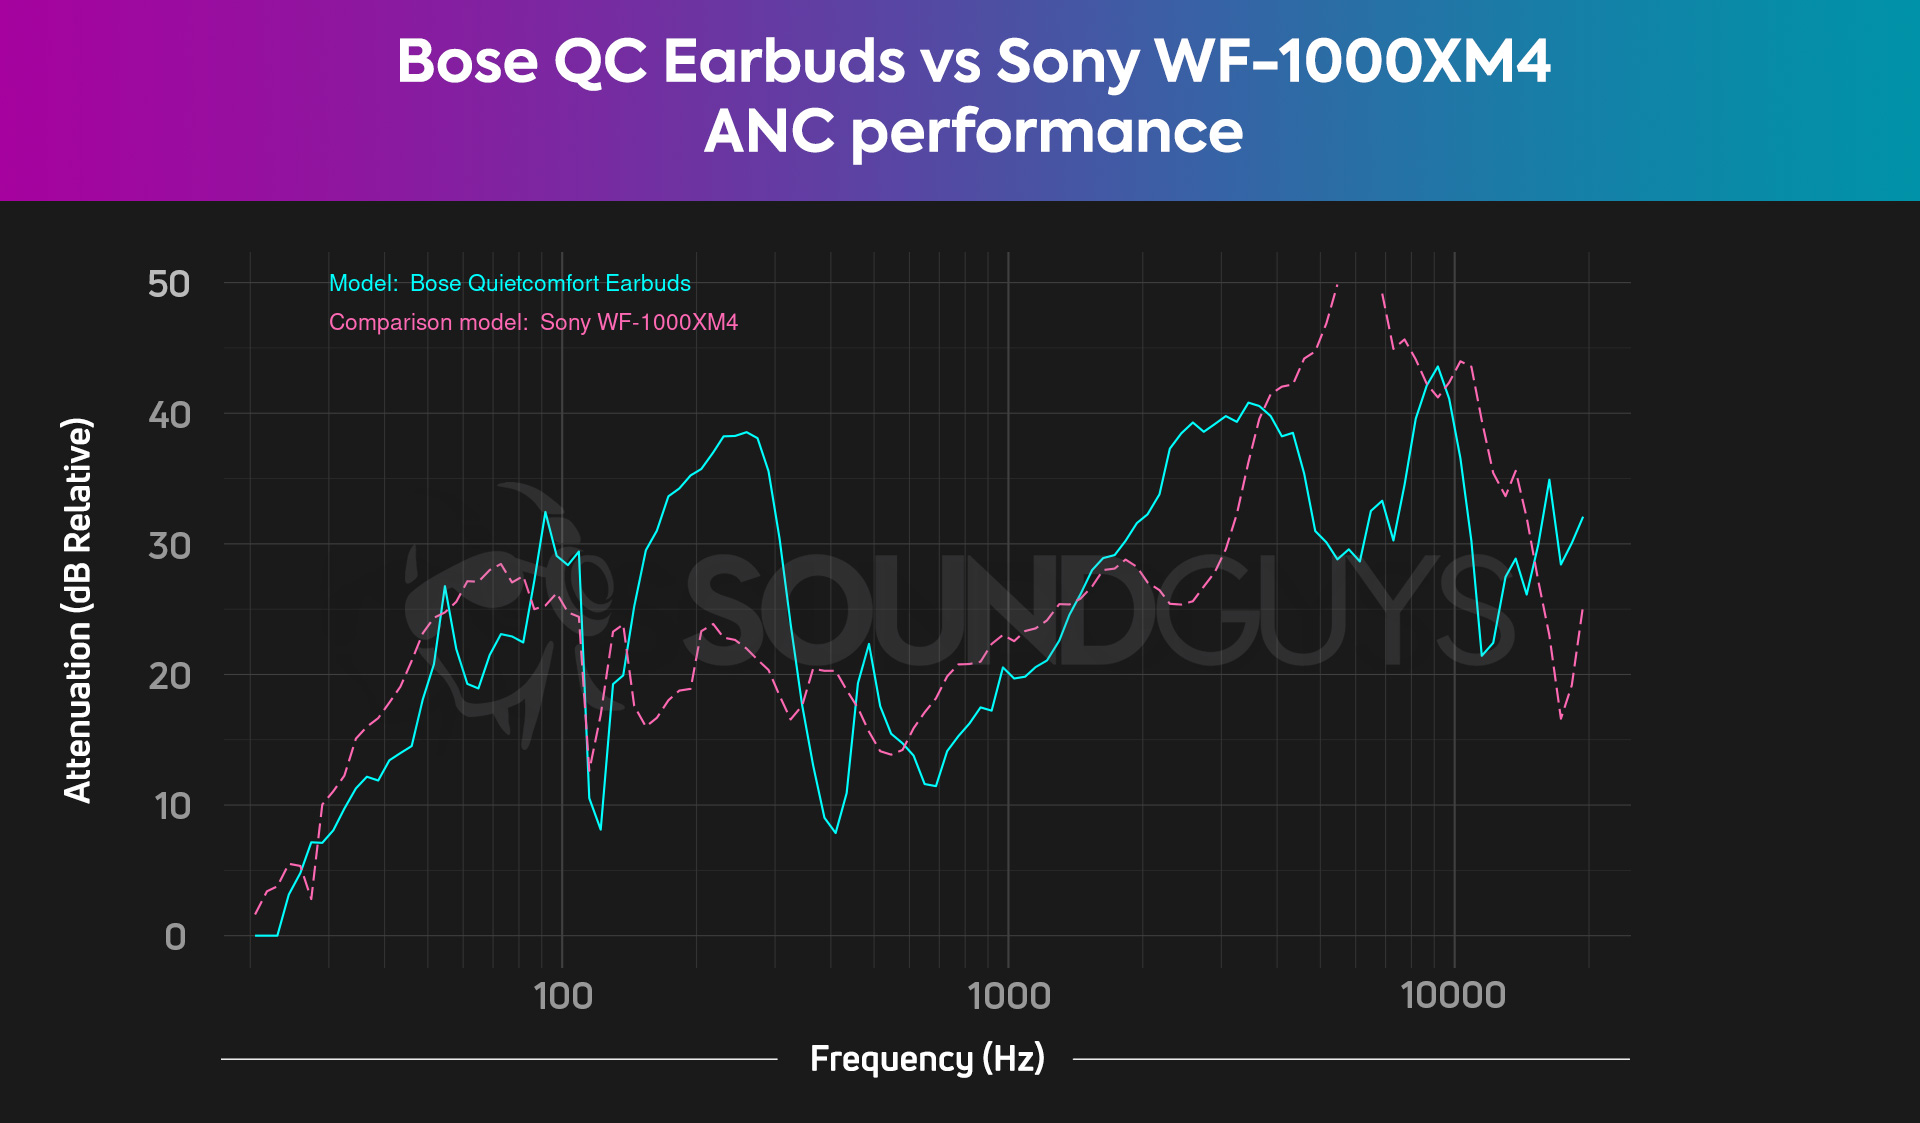 A chart compares the Bose QC Earbuds noise canceling to the Sony WF-1000XM4, revealing that Bose's earphones do more to attenuate low frequencies.